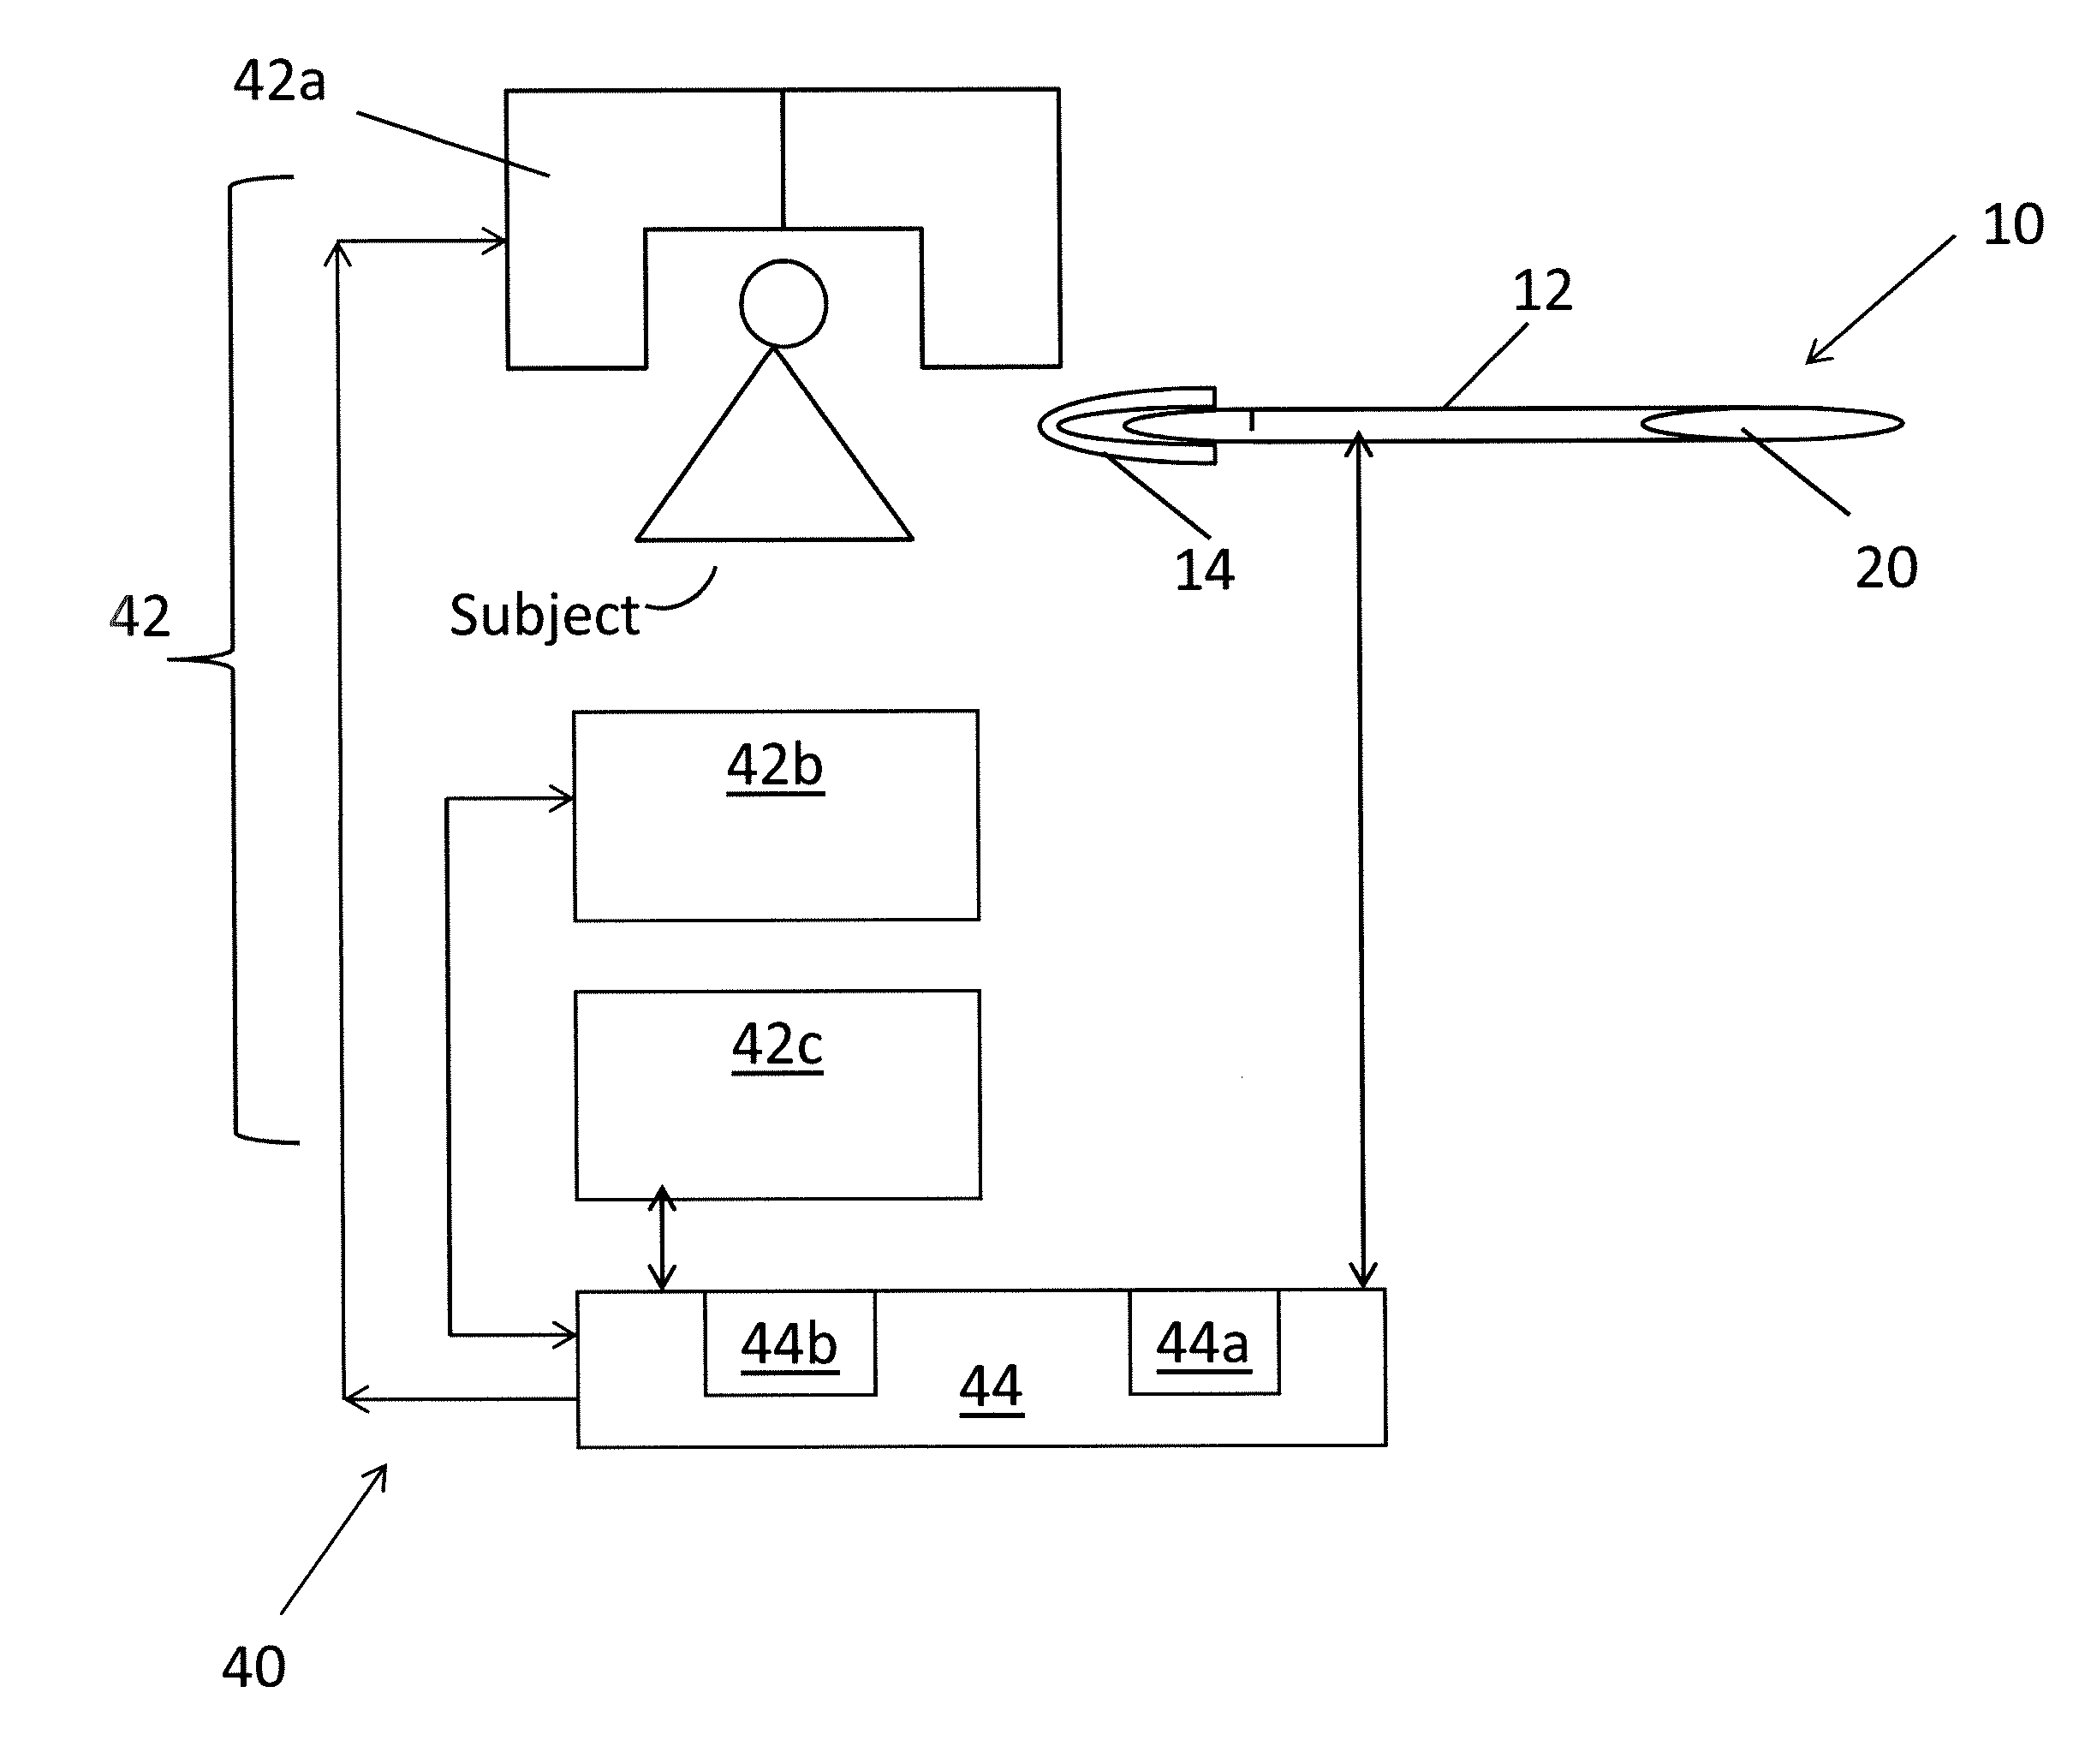 Compressable catheter tip with image-based force sensing